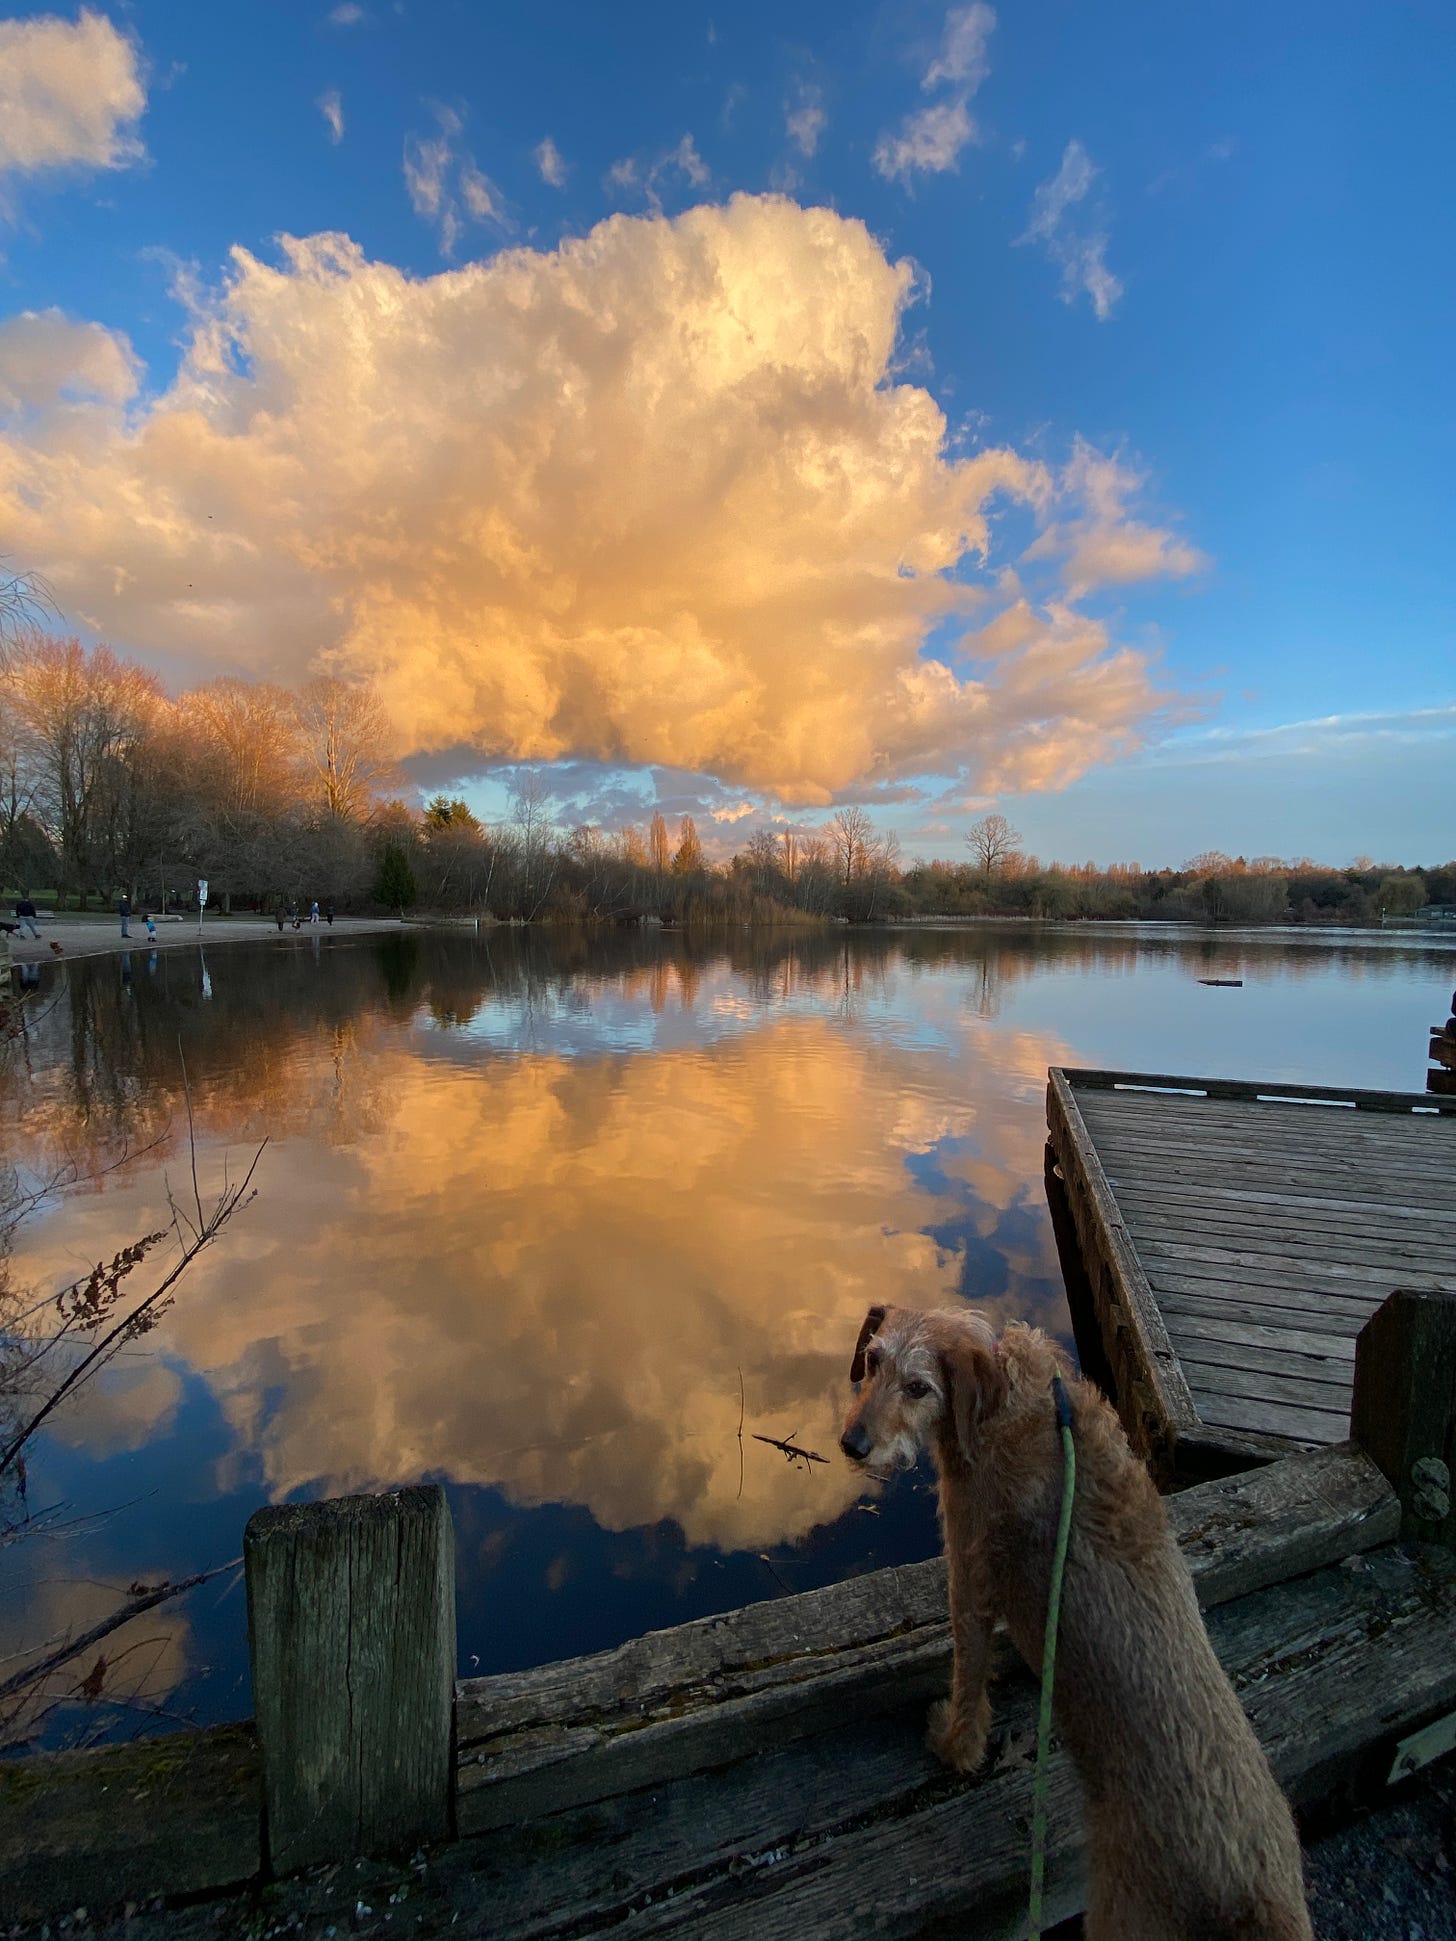 Sunset at Trout Lake in Vancouver. A dog stands at the edge of the lake. in the background a massive golden could is reflecting on the still water.